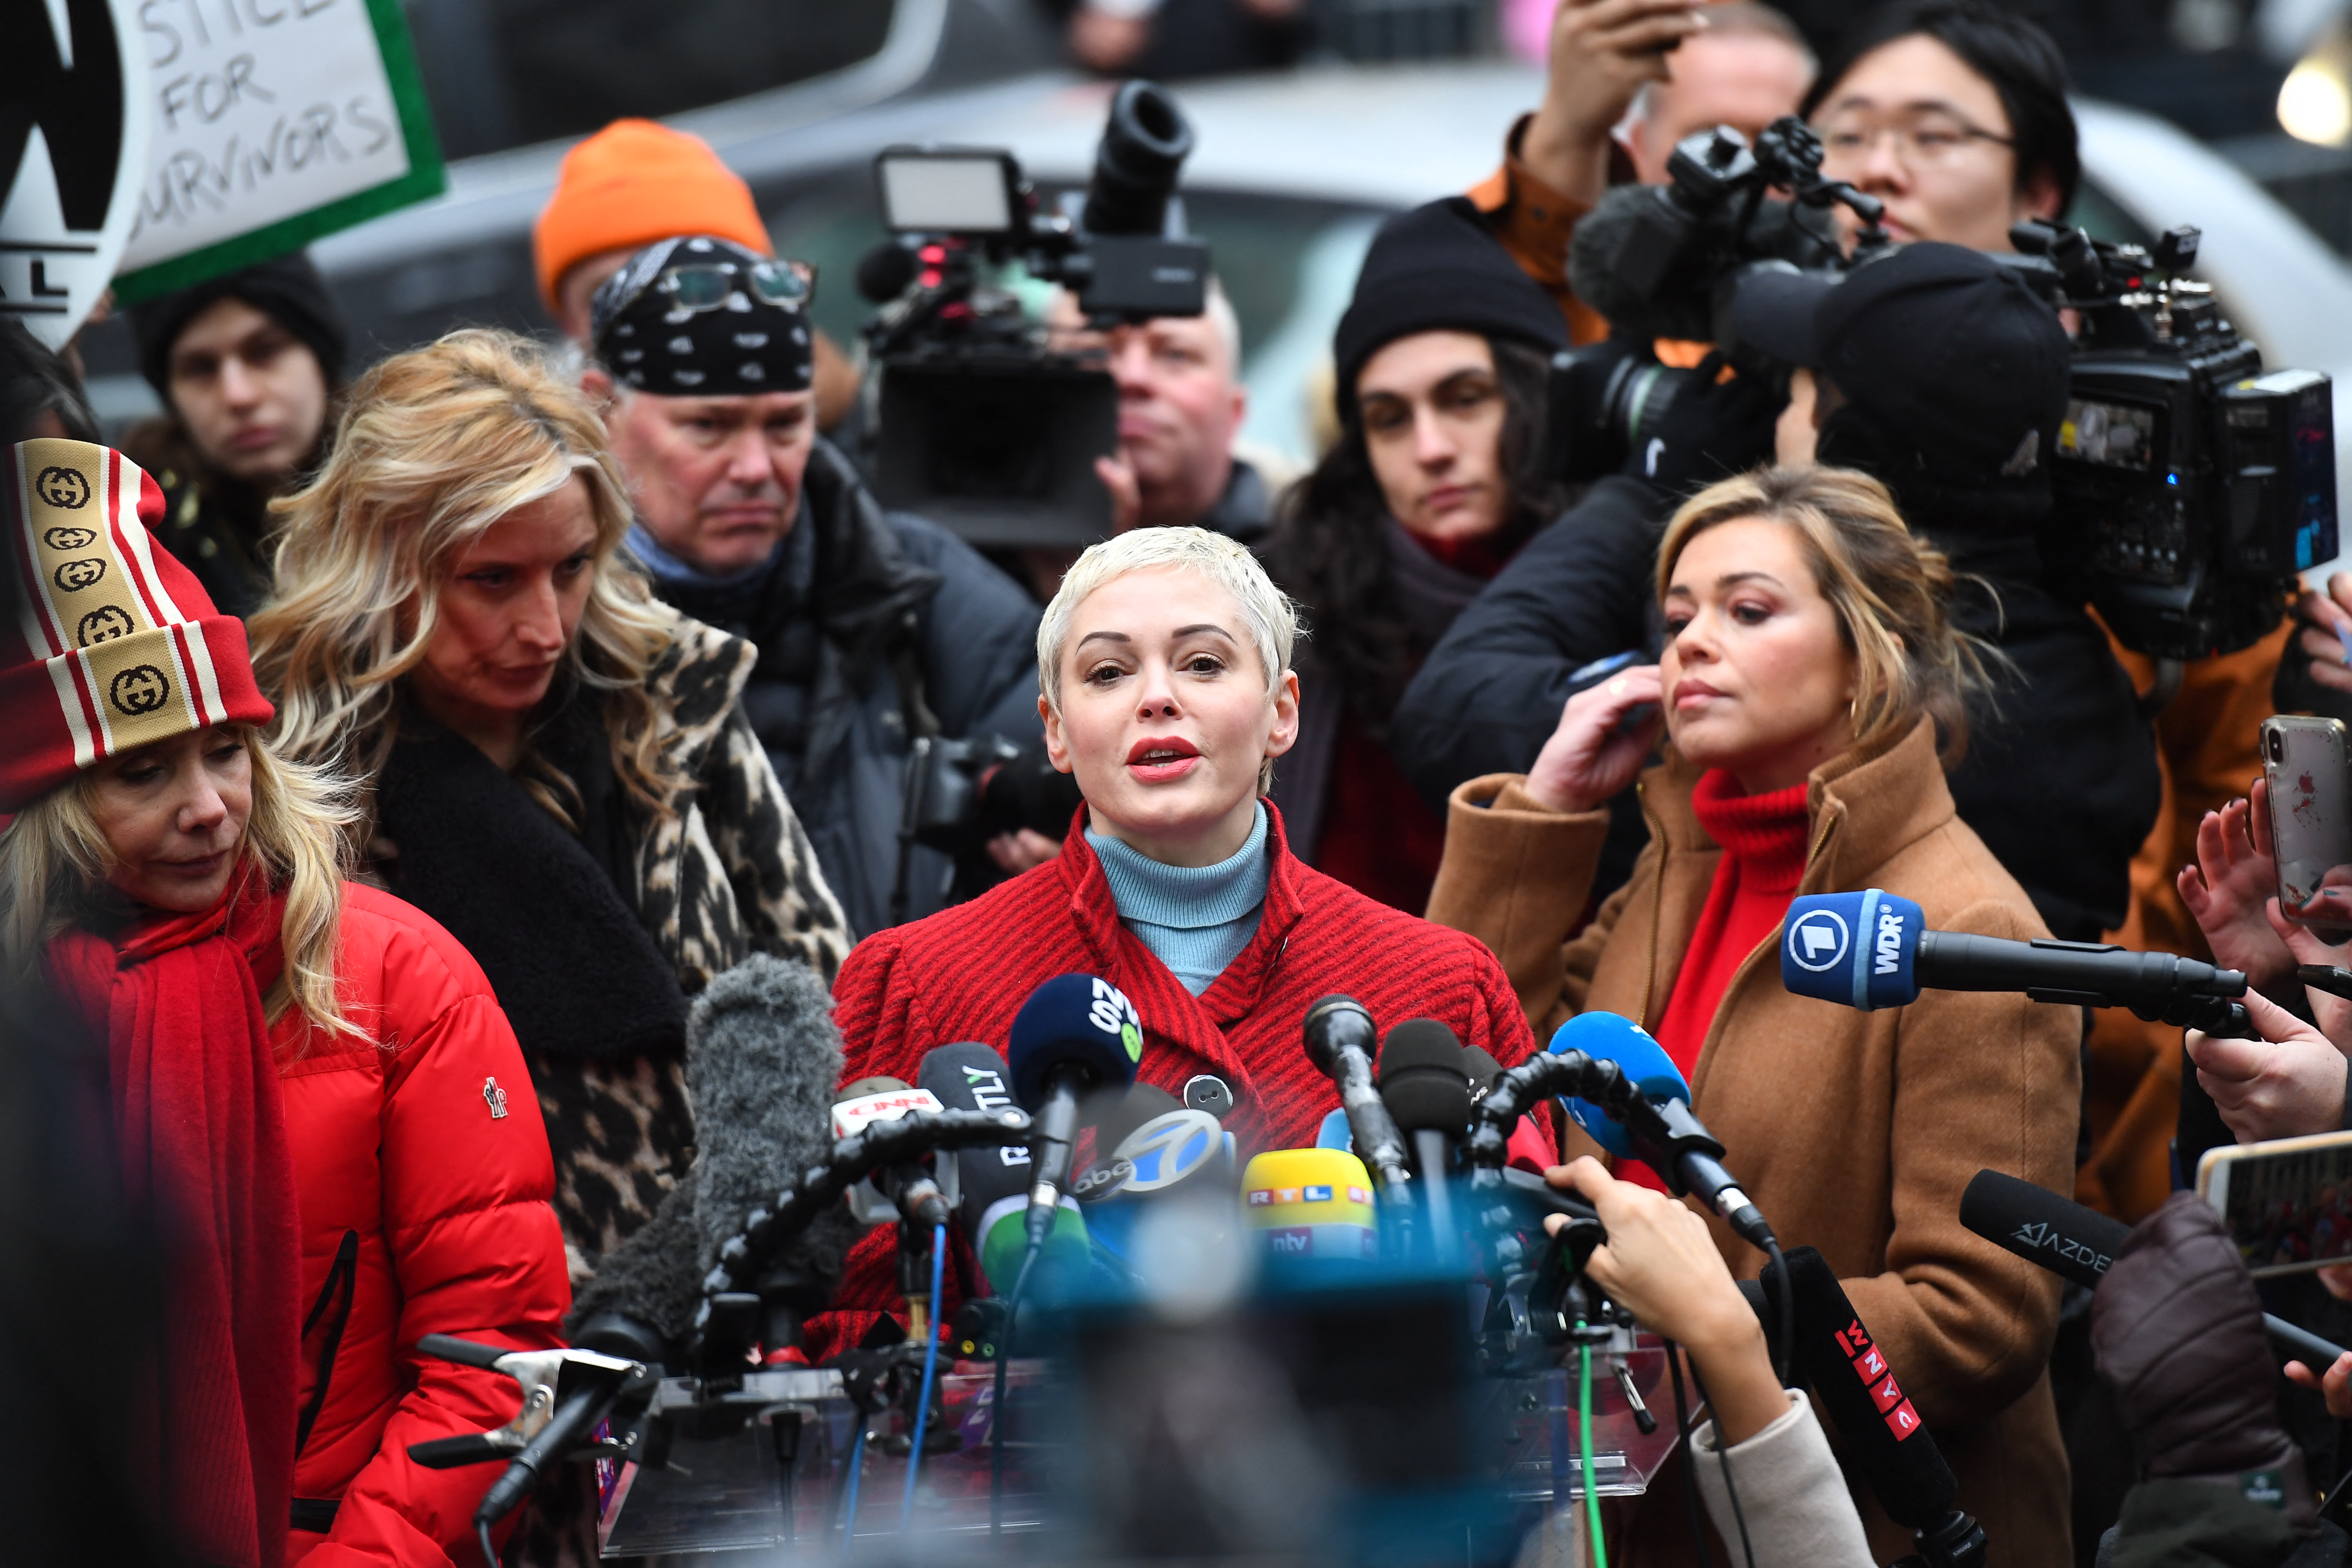 Rose McGowan at the Harvey Weinstein's trial on charges of rape and sexual assault in Manhattan, New York City, January 6, 2020. | Source: Getty Images